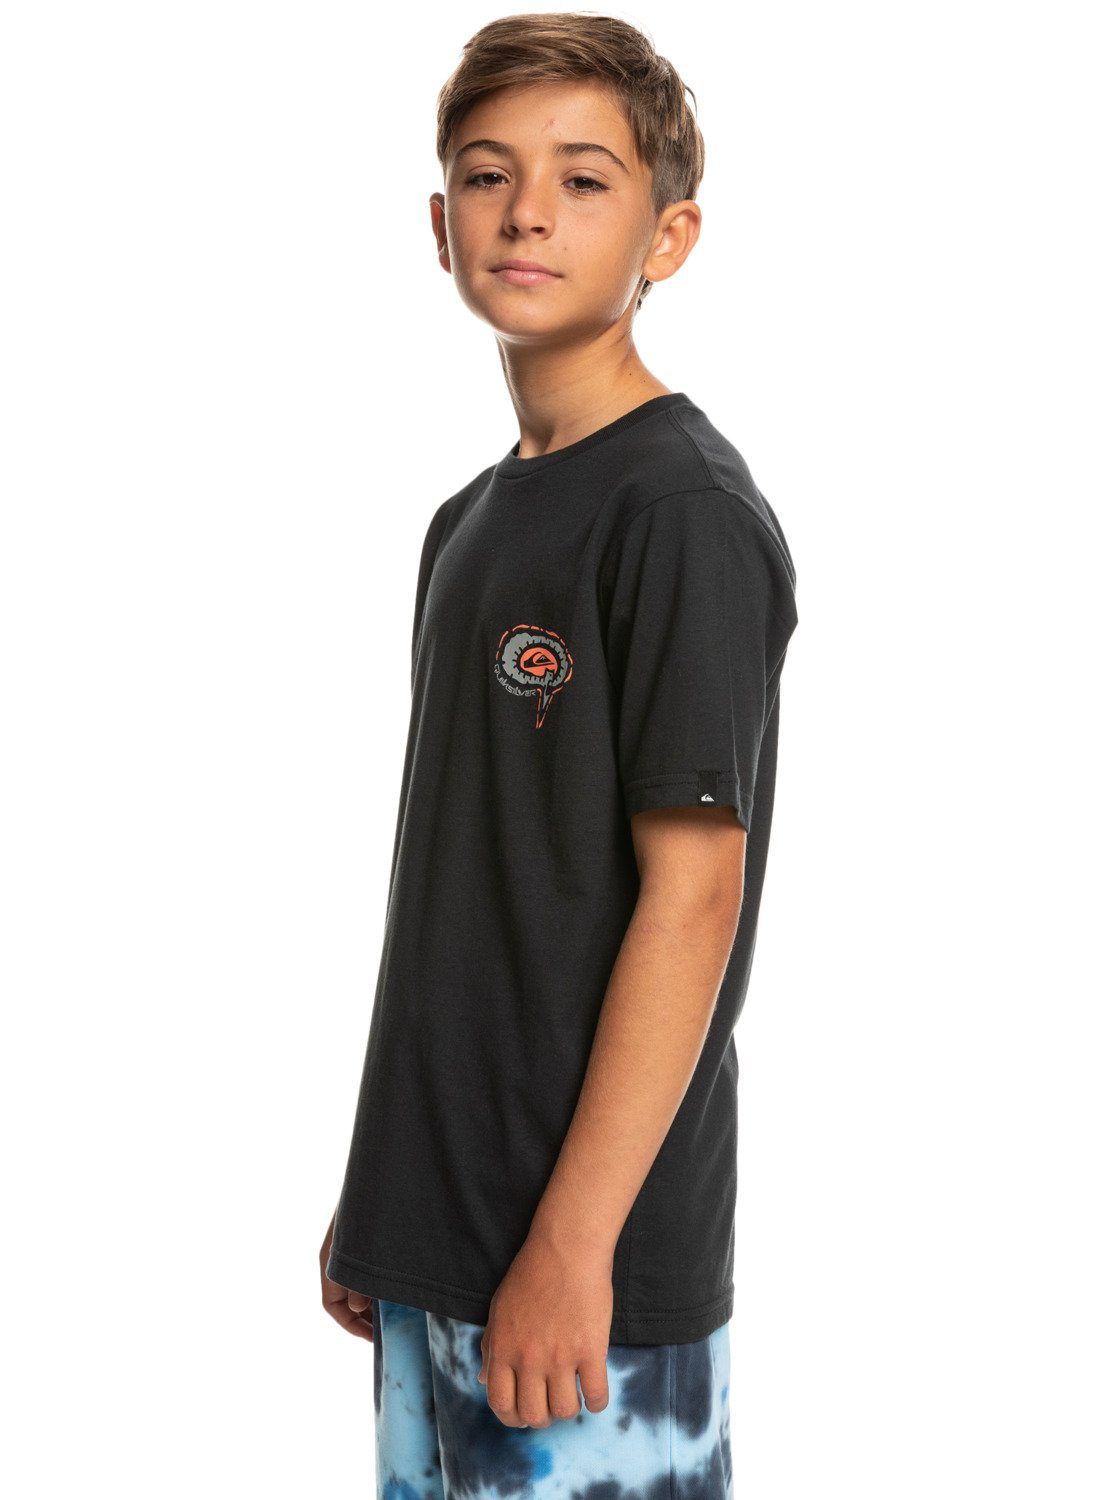 Snaky Words T-Shirt Quiksilver